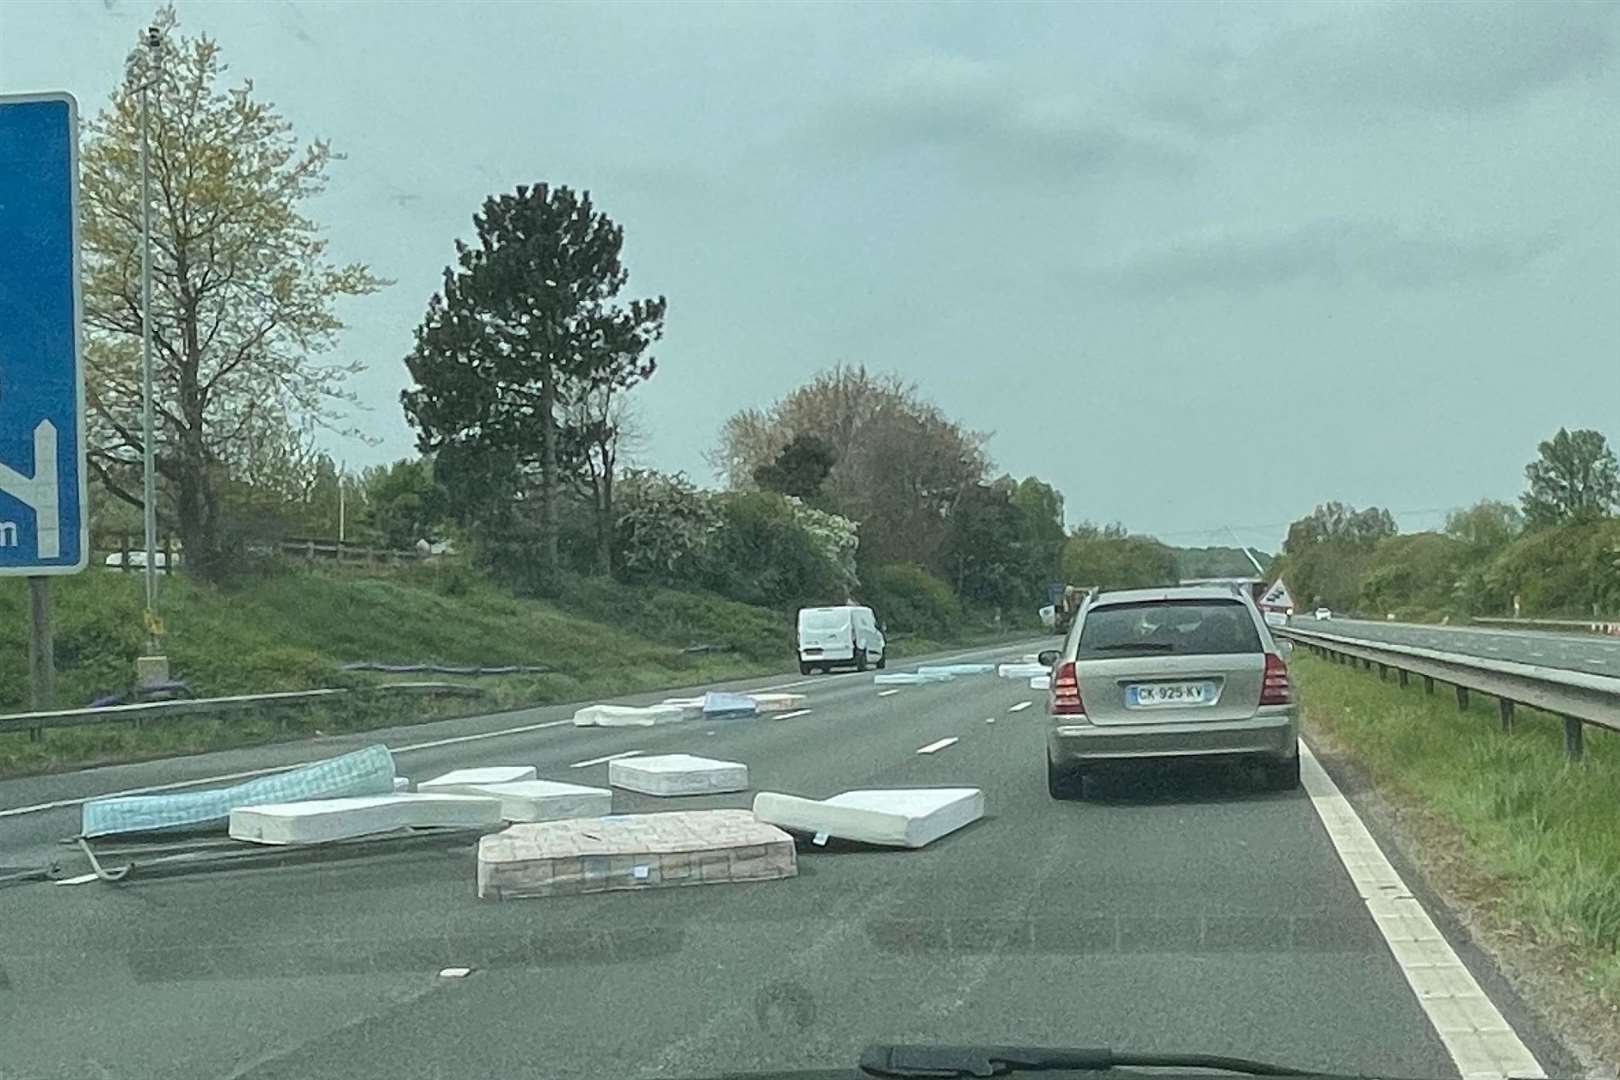 Mattresses are strewn over the M20 carriageway